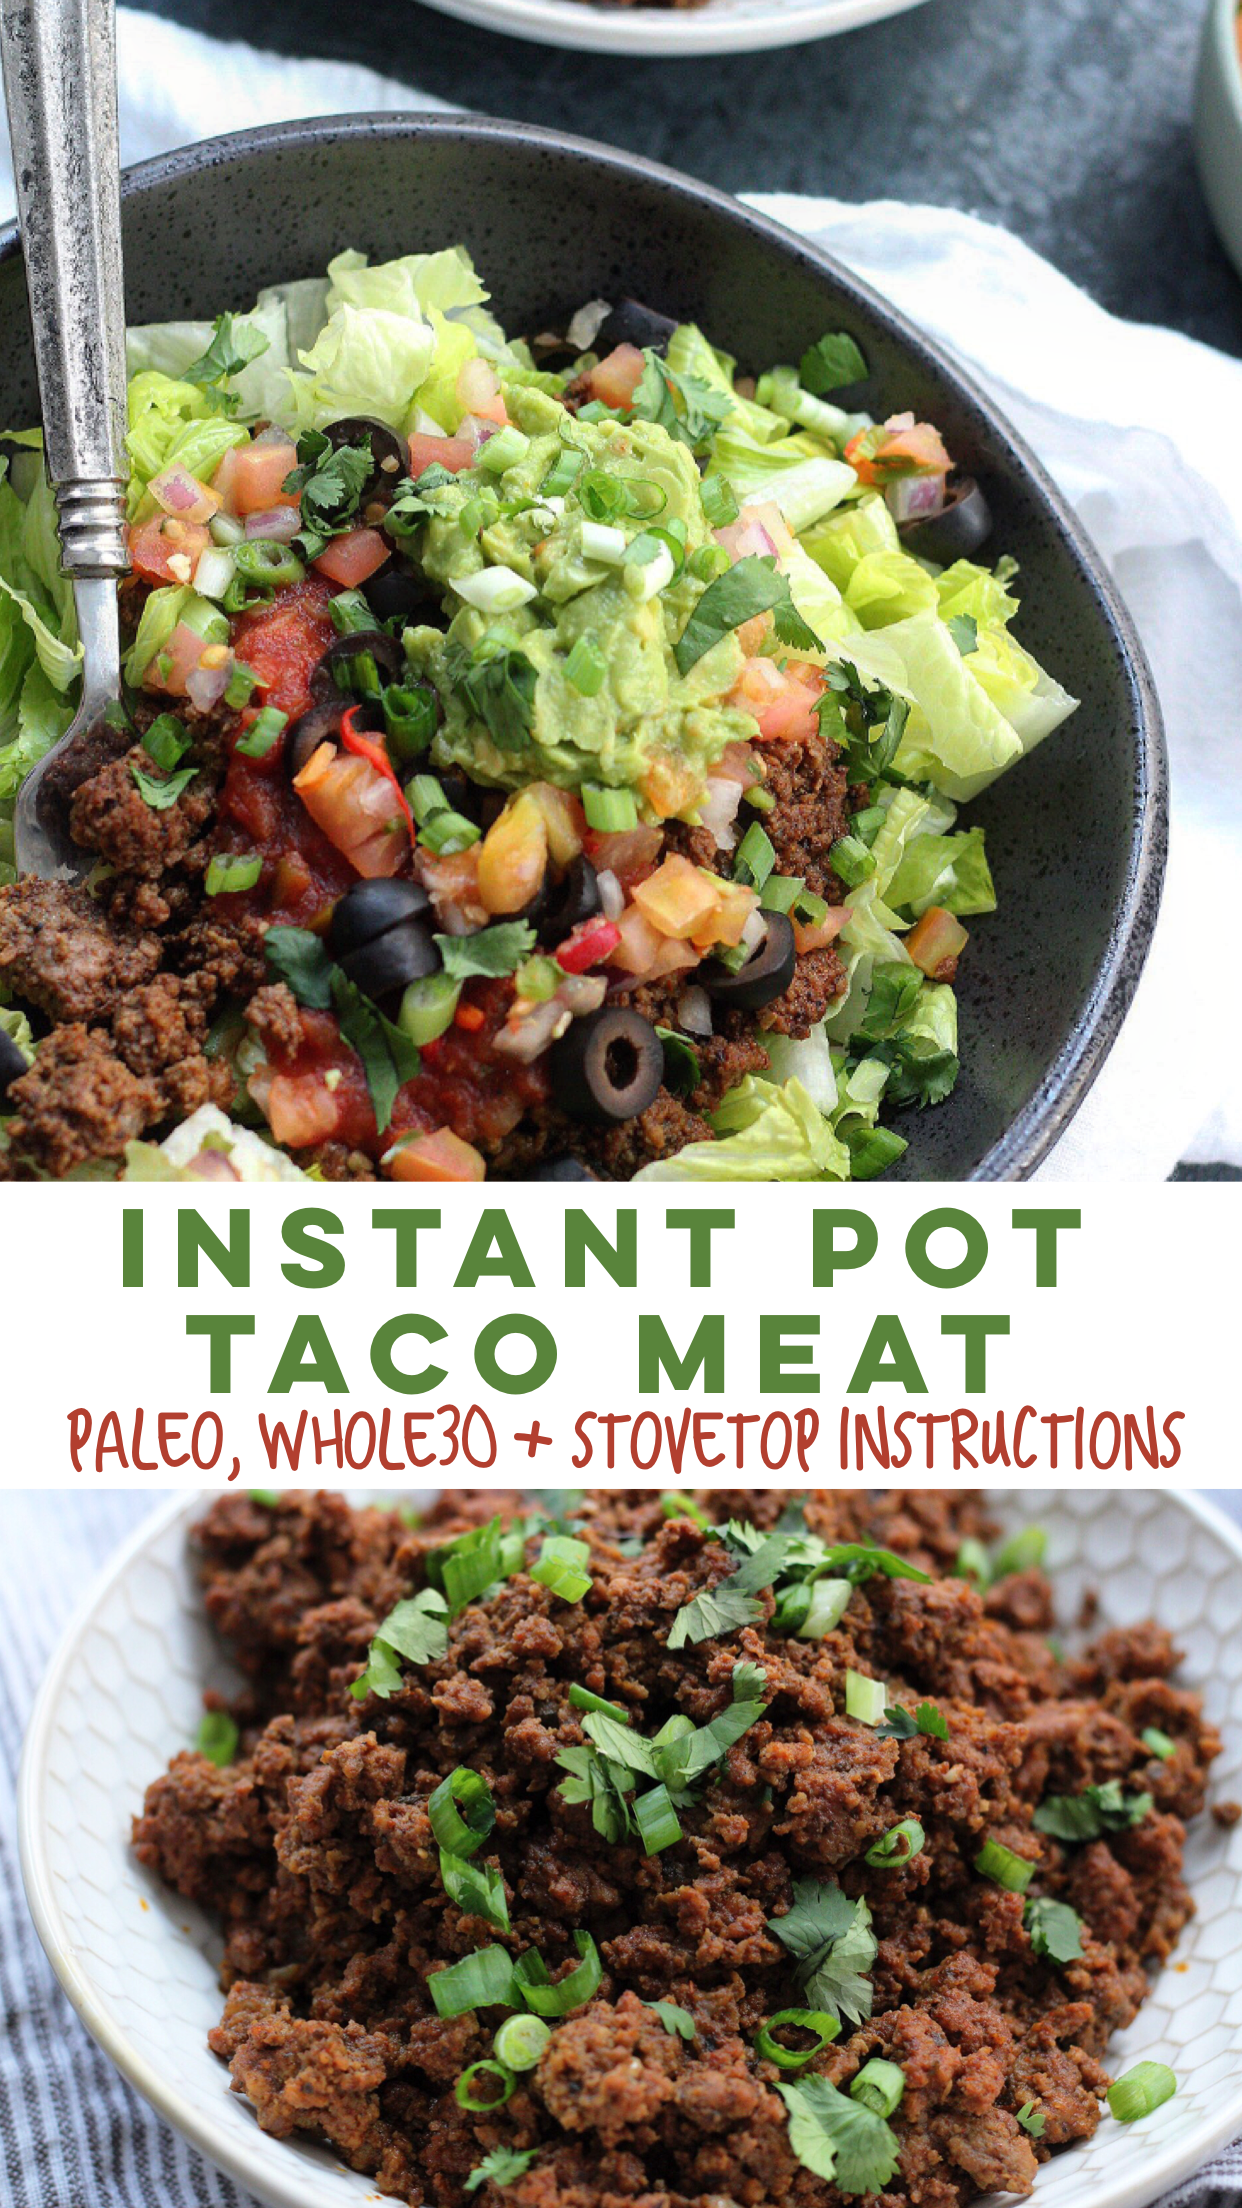 Whole30 Instant Pot Taco Meat: Meal Prepping Made Easy - Whole Kitchen Sink